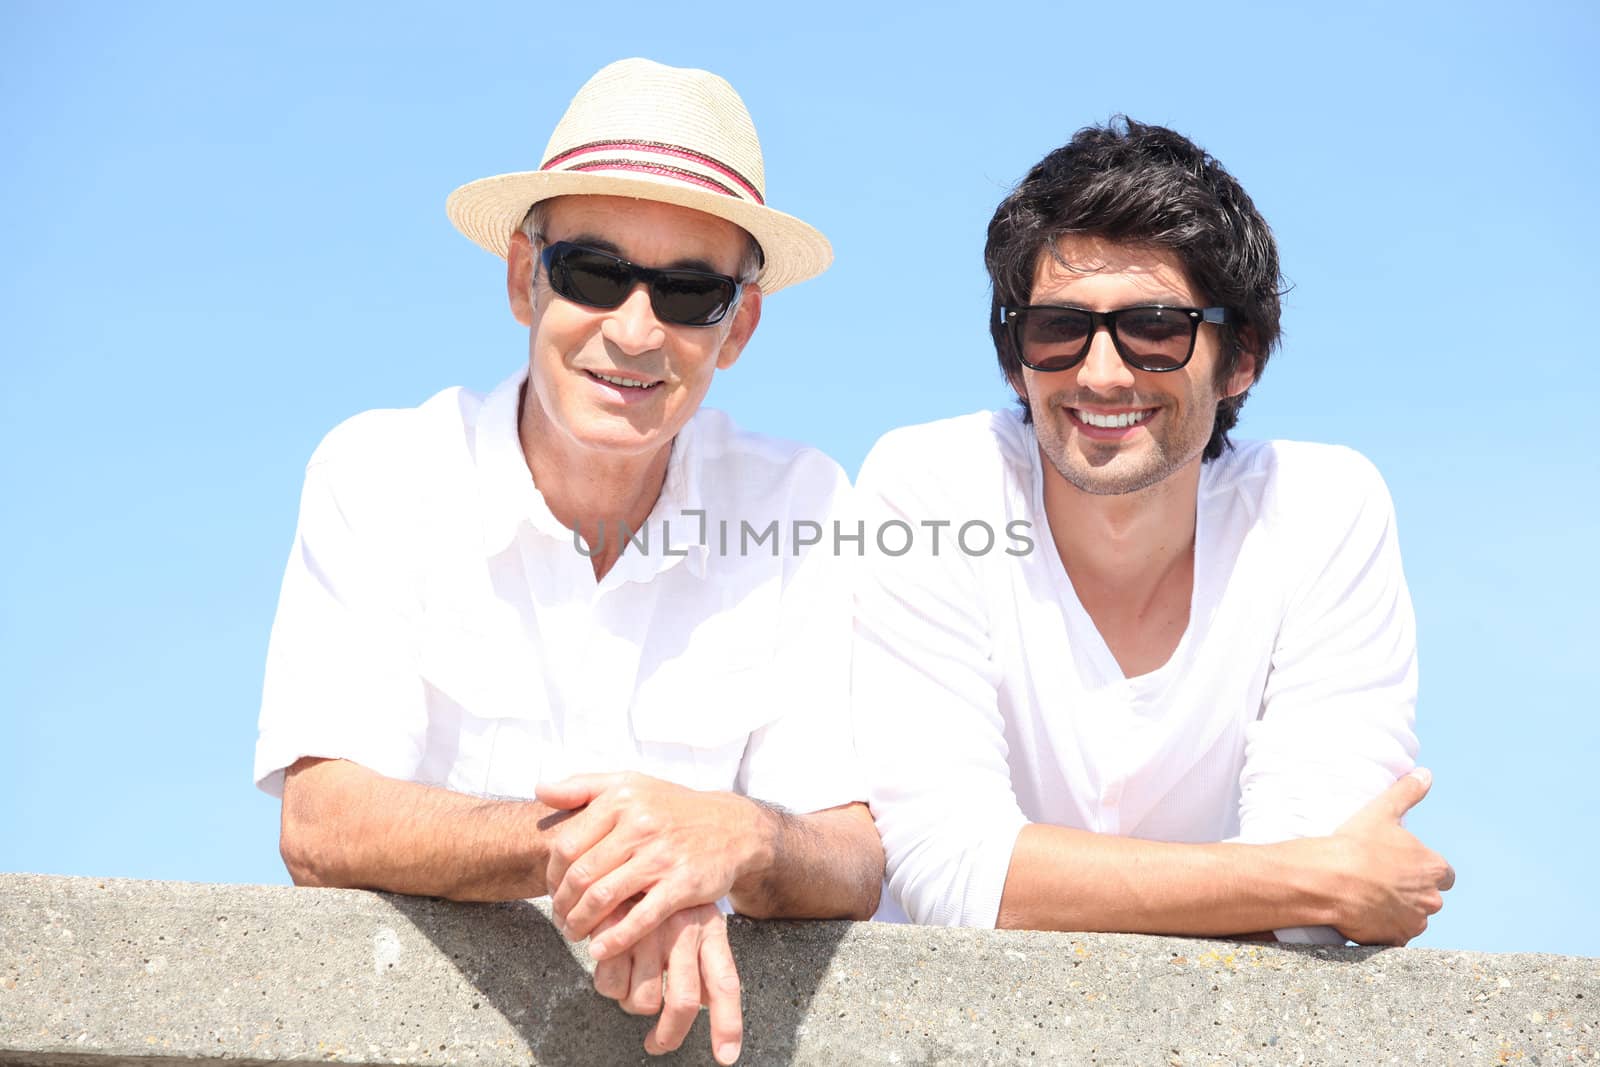 Two men wearing sunglasses in the sunshine